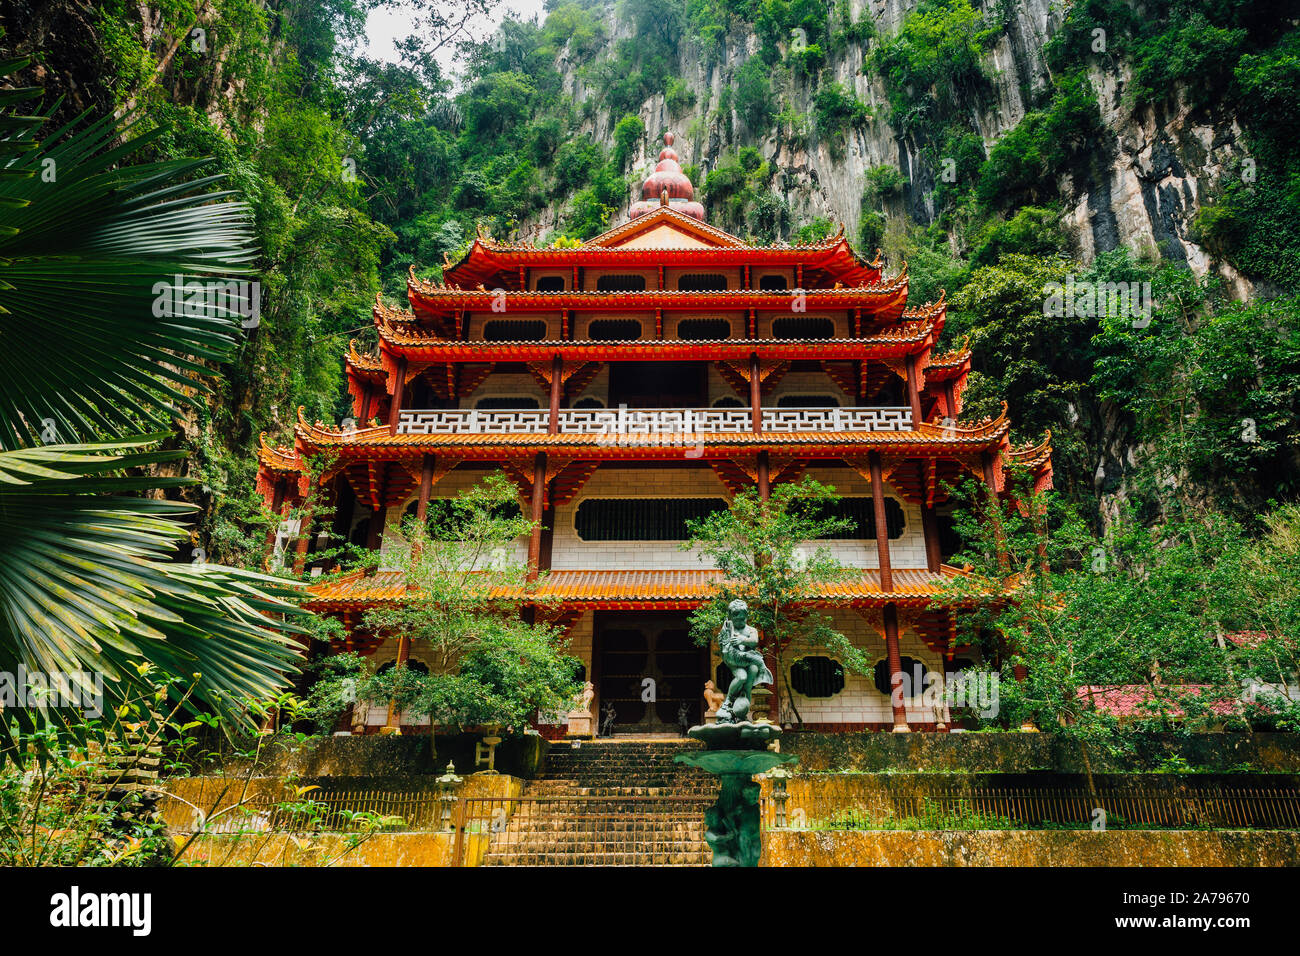 The Sam Poh Tong Chinese Temple the oldest and the main cave temple in  Ipoh, Perak, Malaysia Stock Photo - Alamy